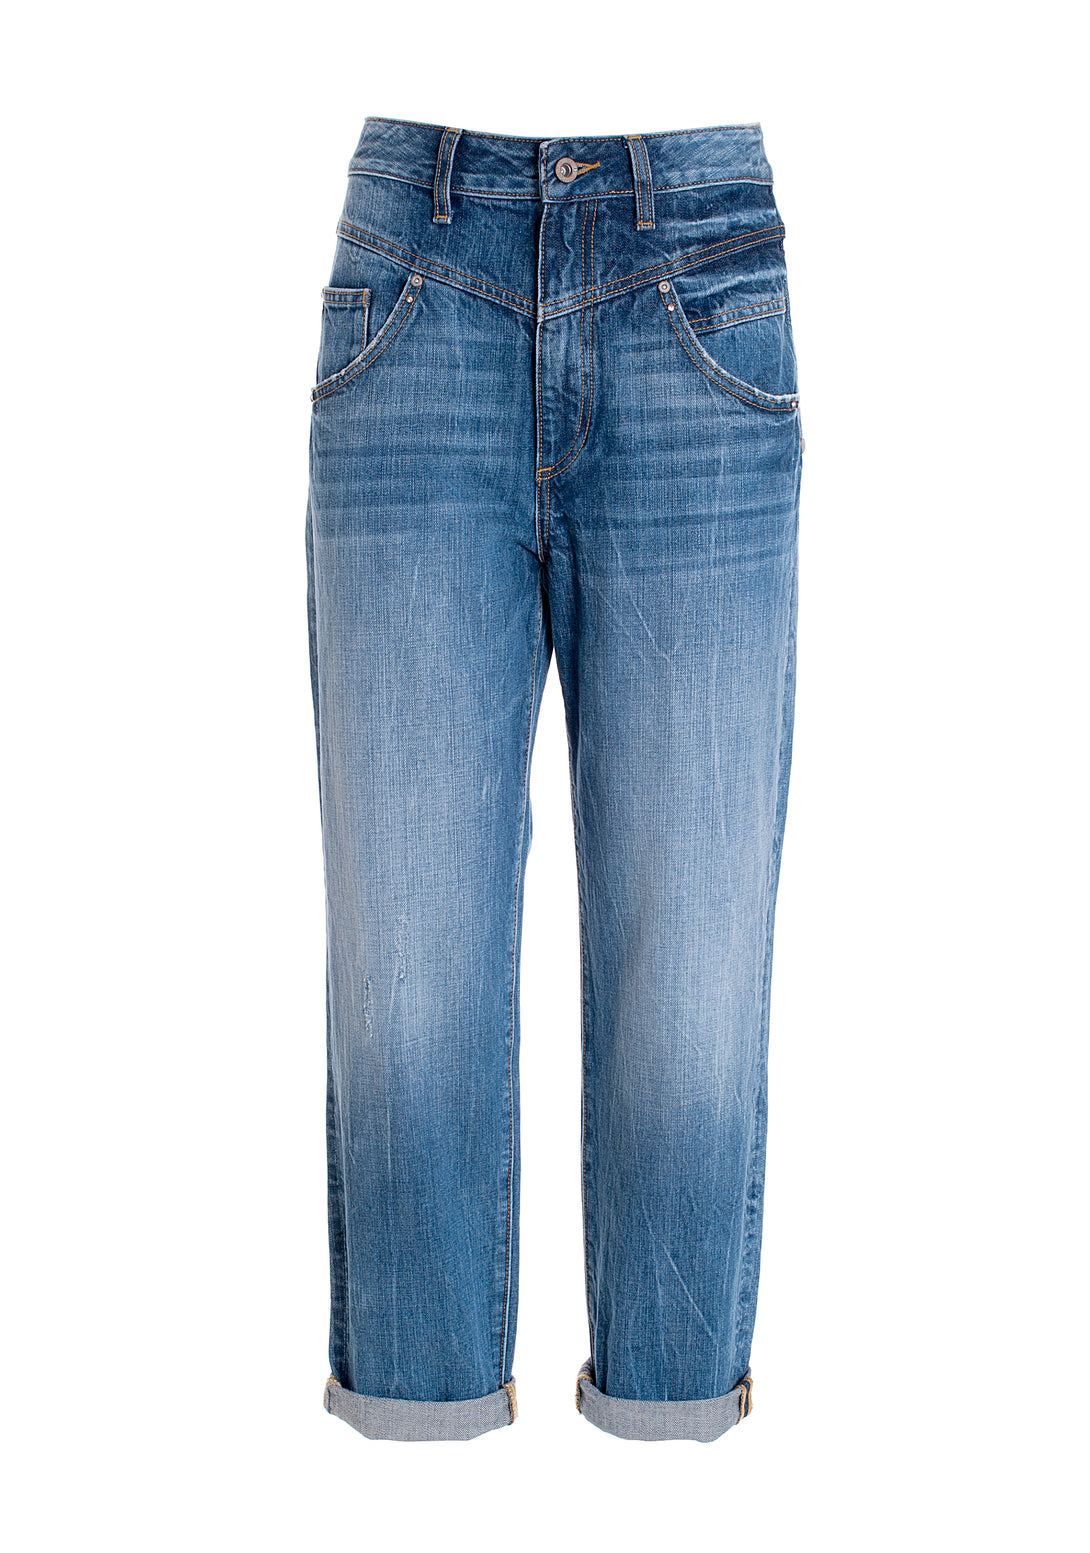 Jeans loose fit made in denim with middle wash